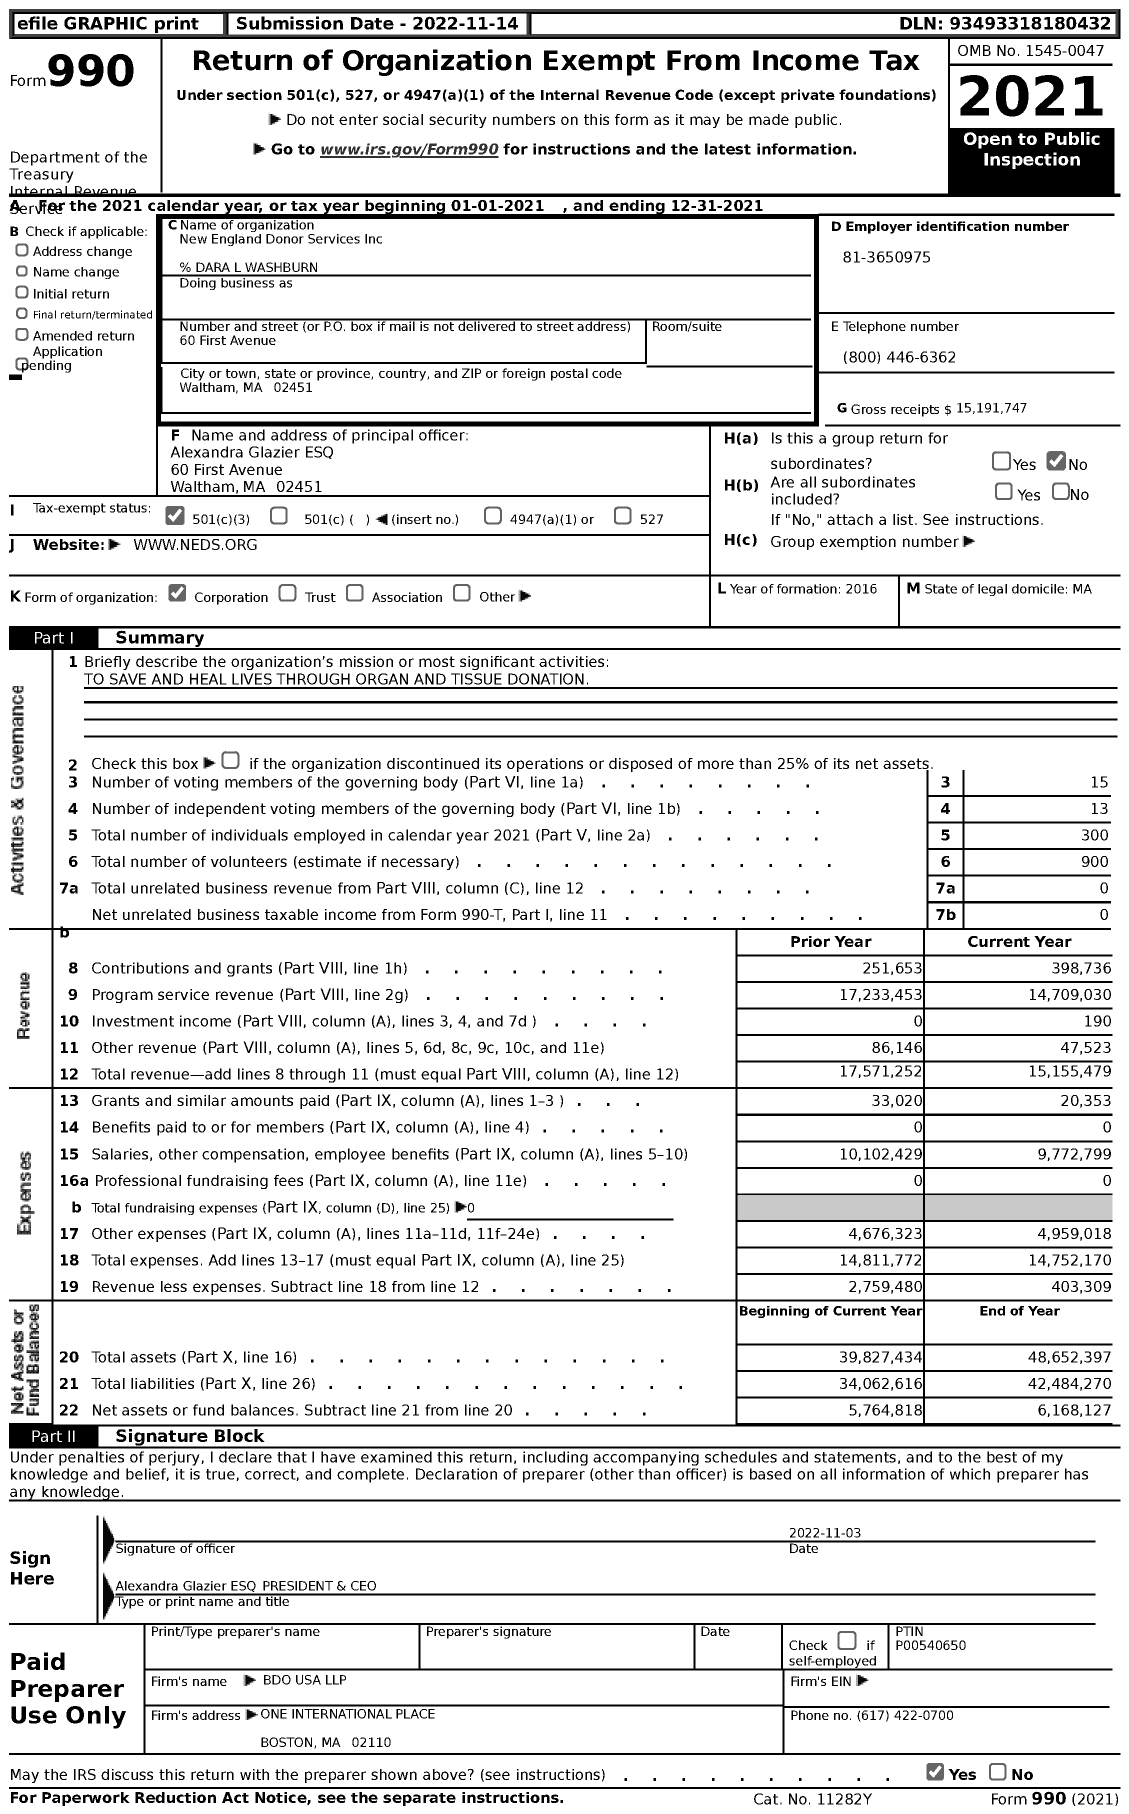 Image of first page of 2021 Form 990 for New England Donor Services